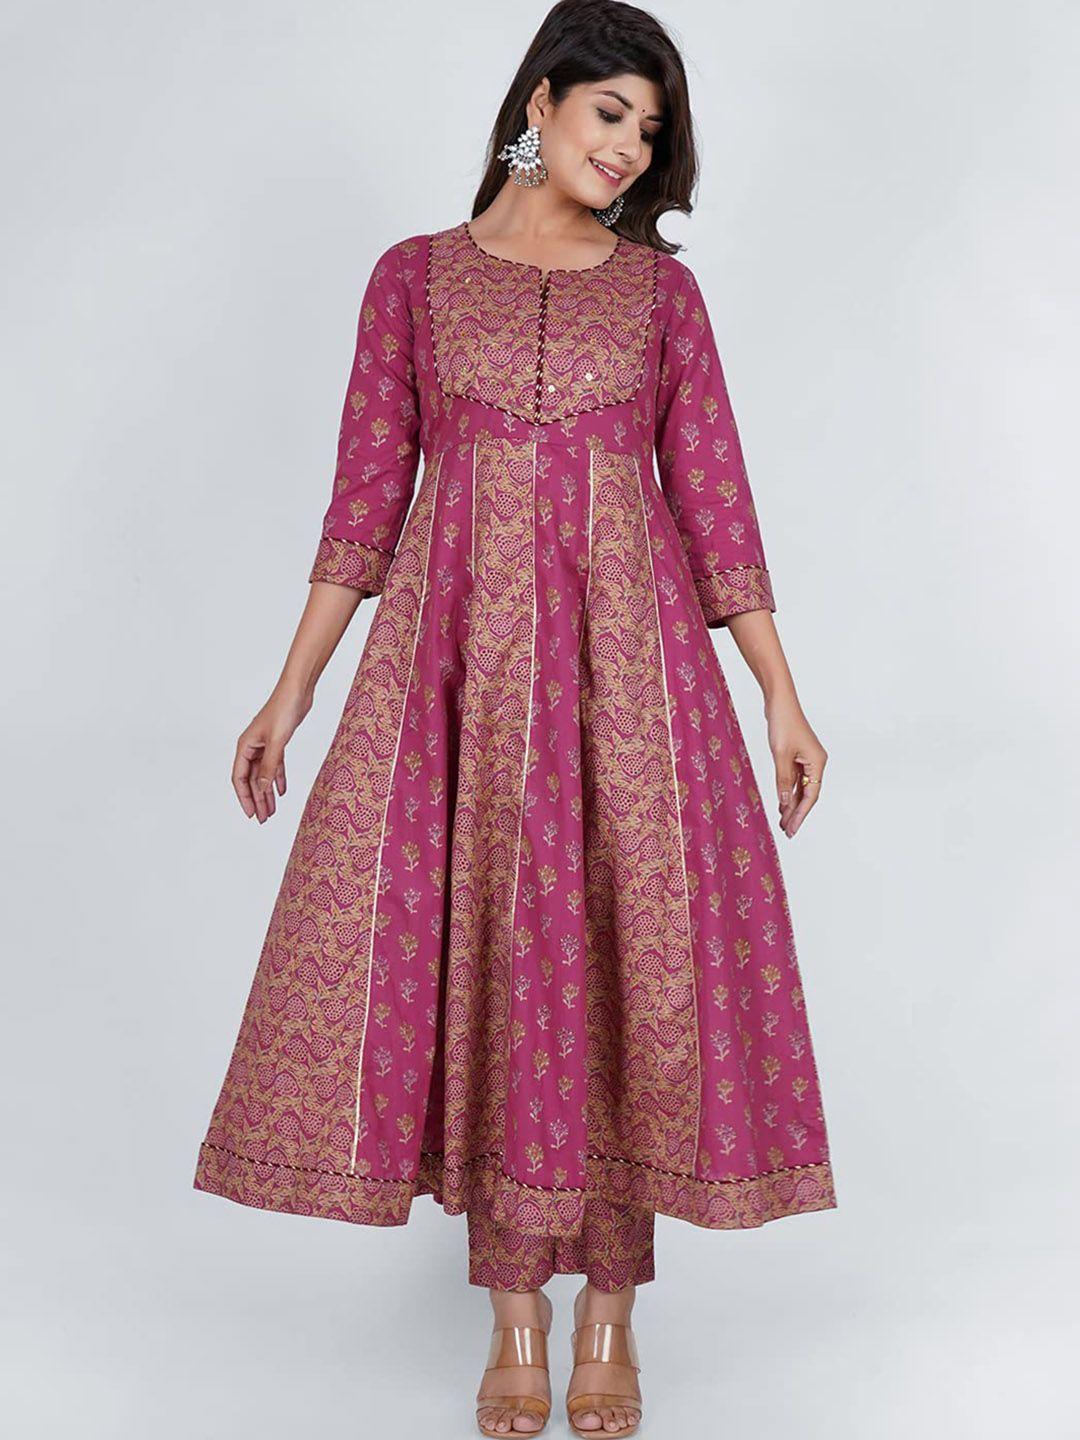 pukhya floral printed pure cotton anarkali kurta with trousers